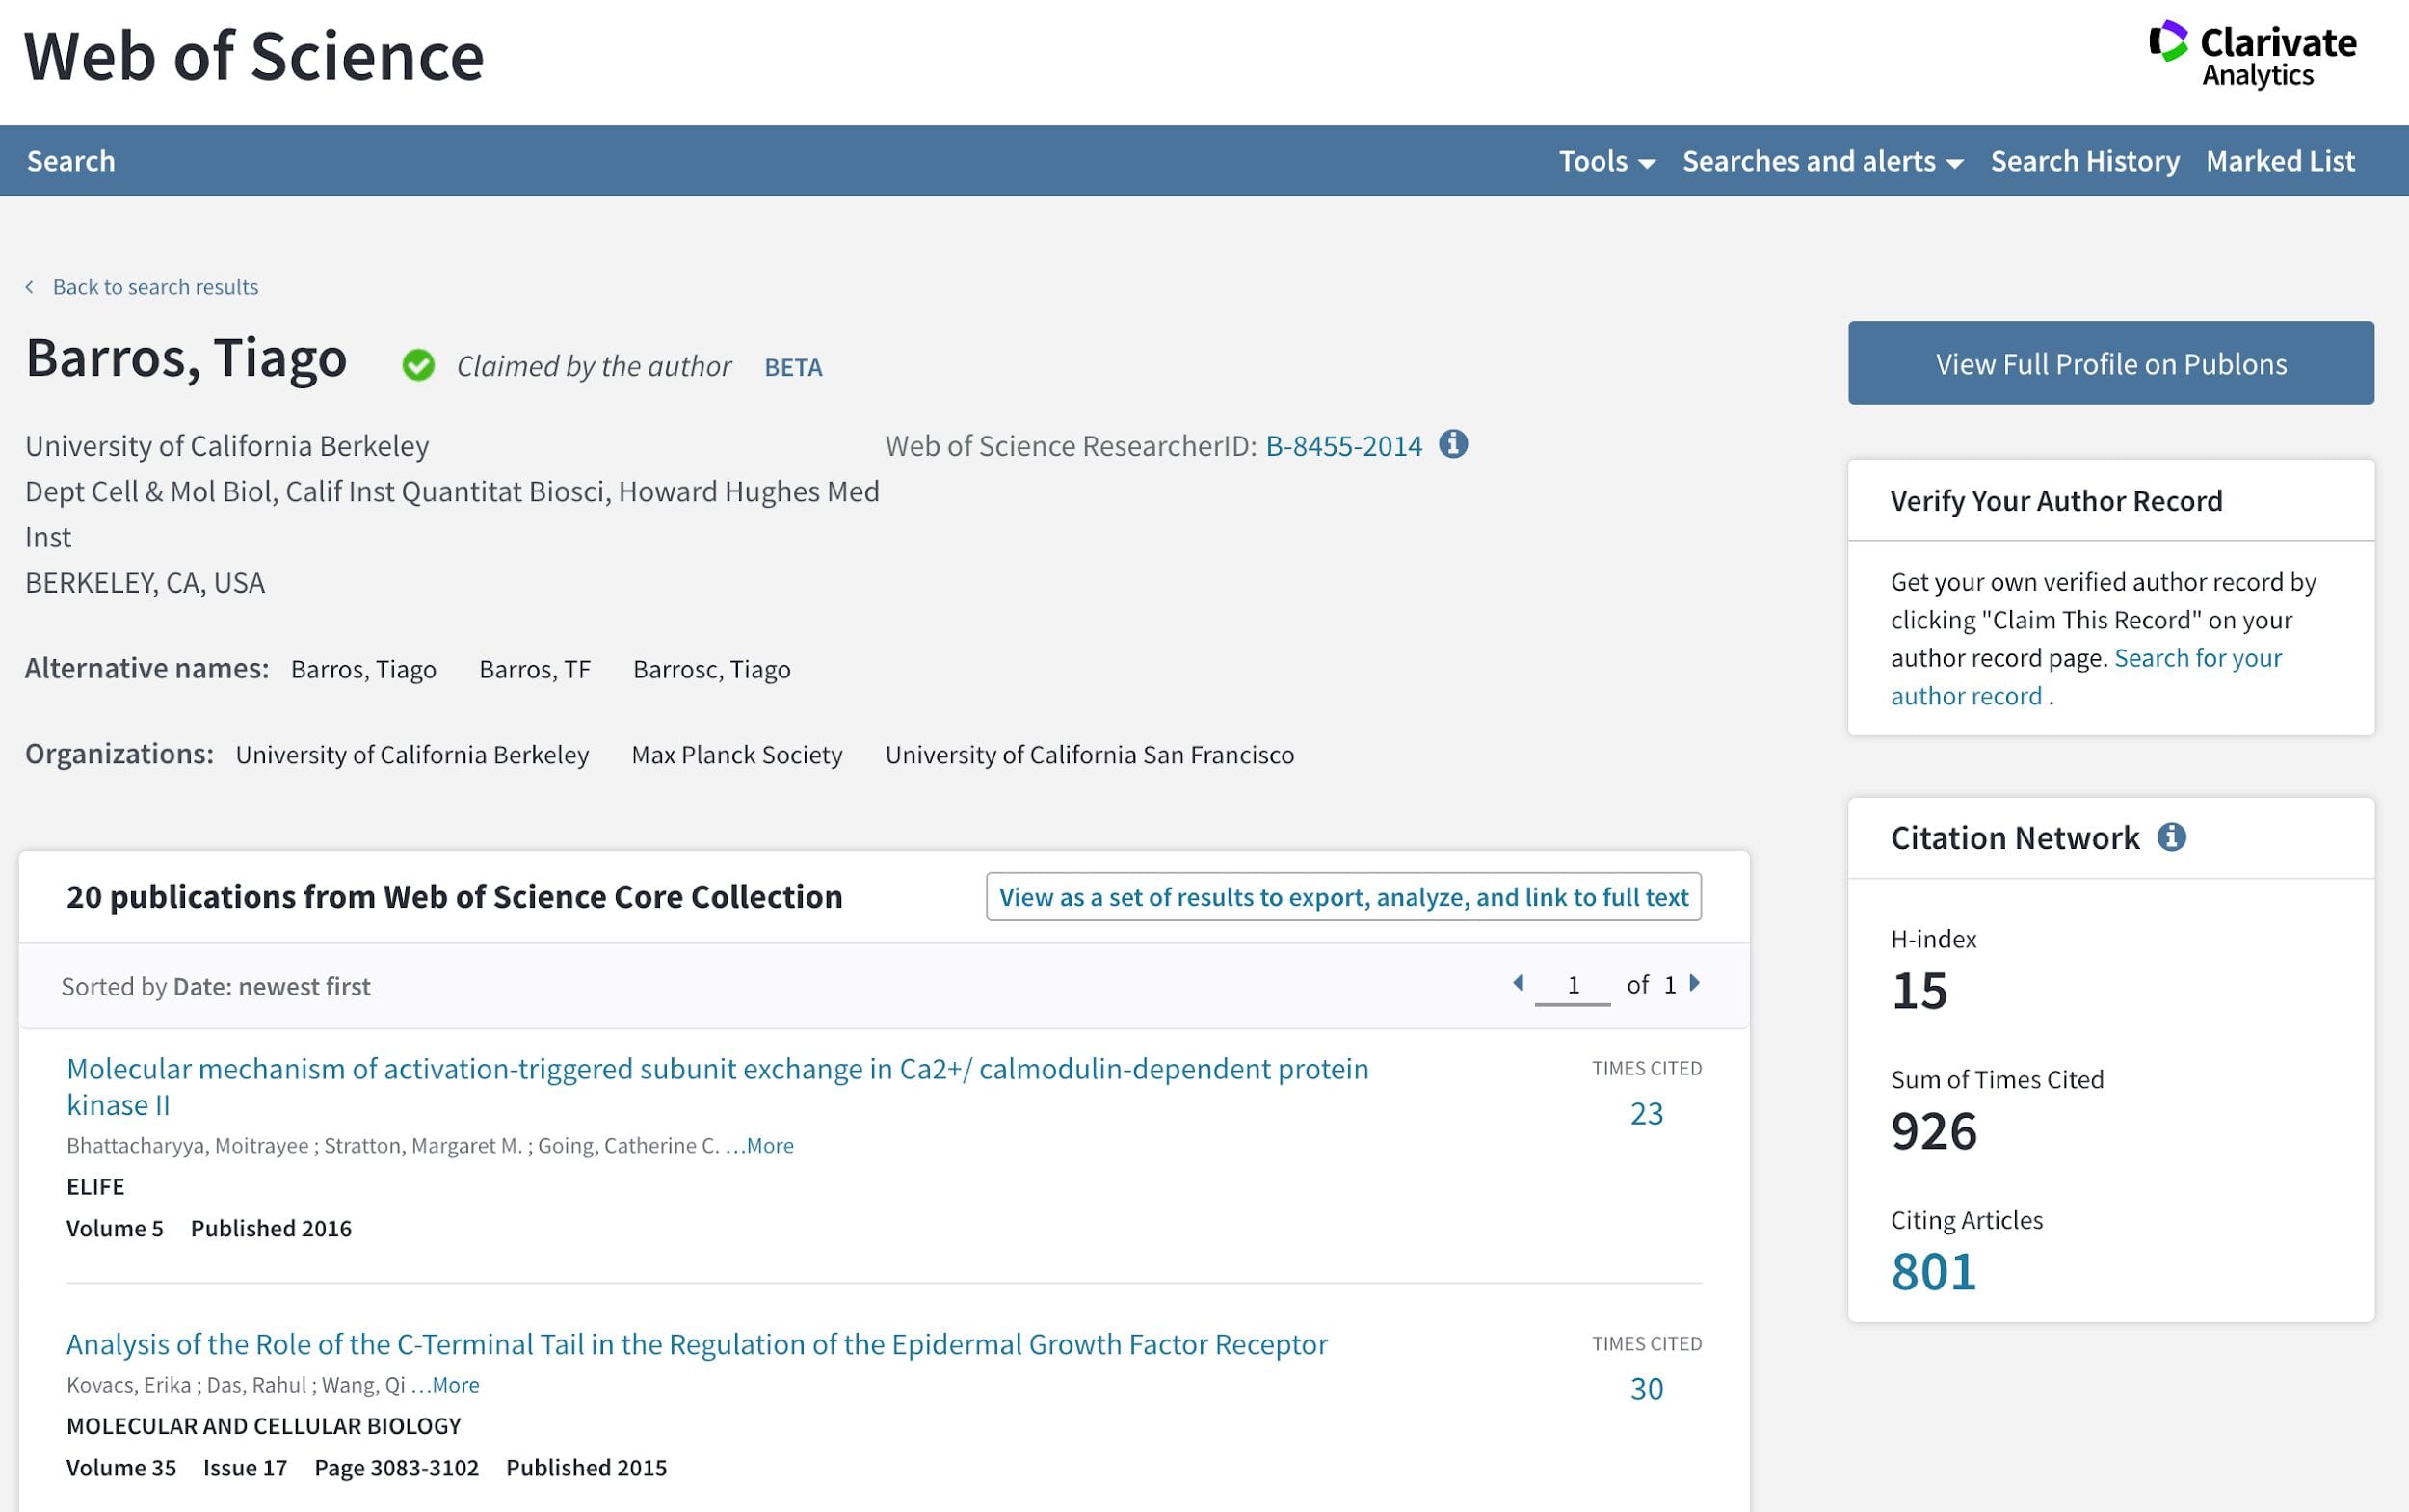 Author record on Web of Science to help you find top authors in your field